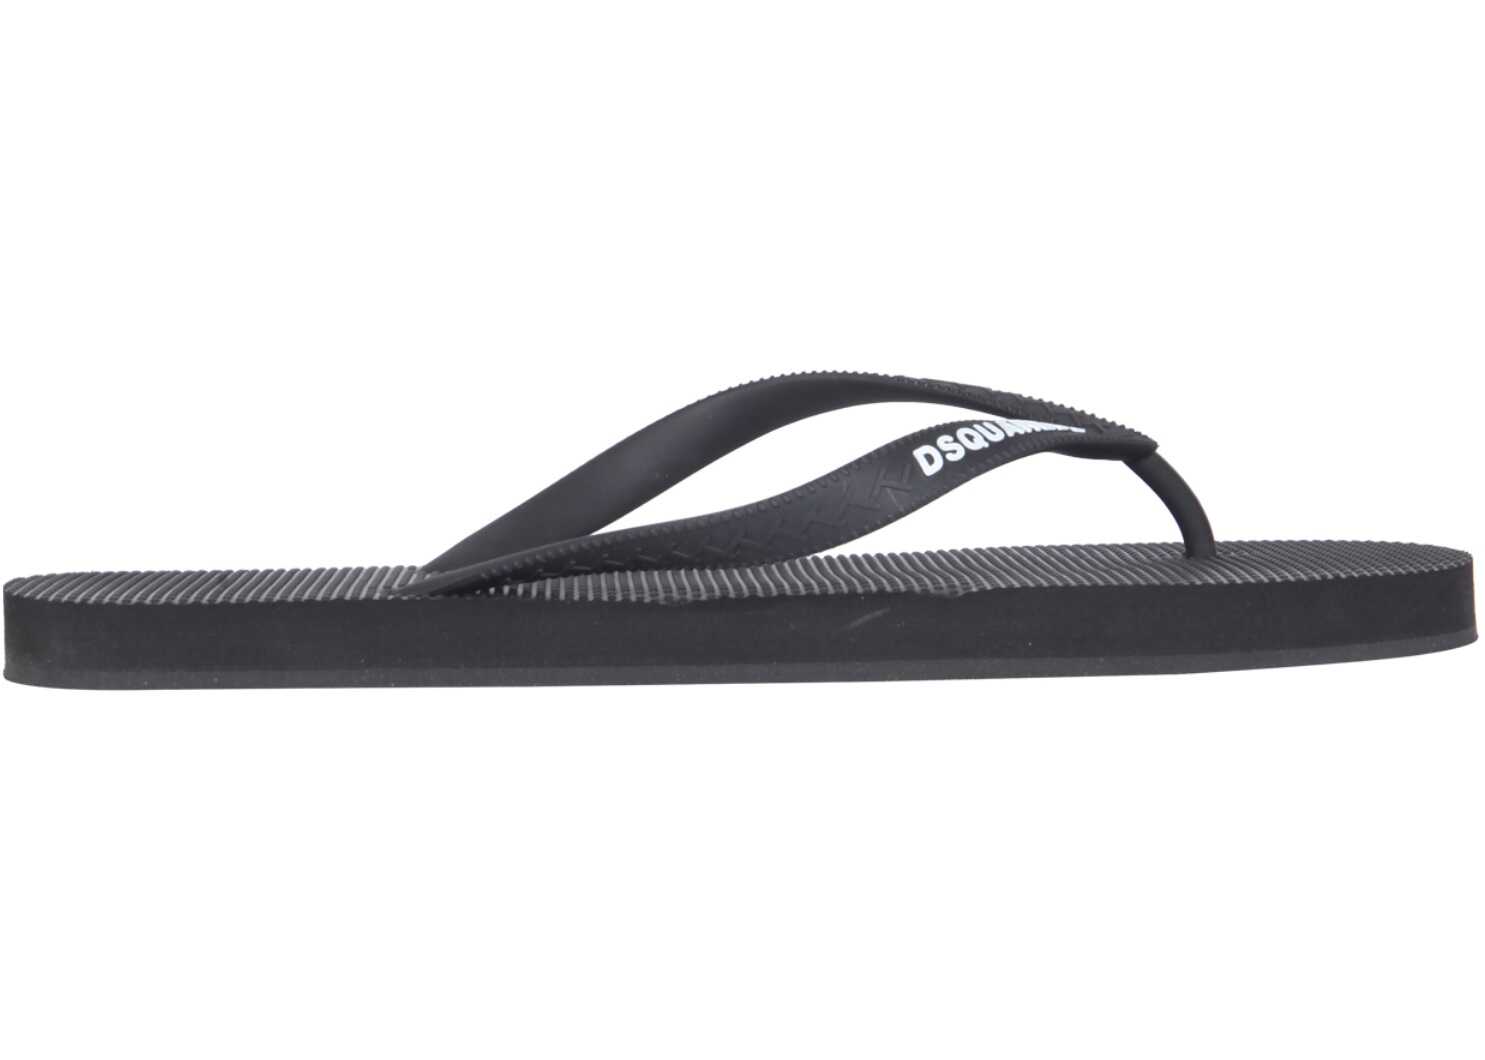 DSQUARED2 Rubber Thong Sandals BLACK b-mall.ro